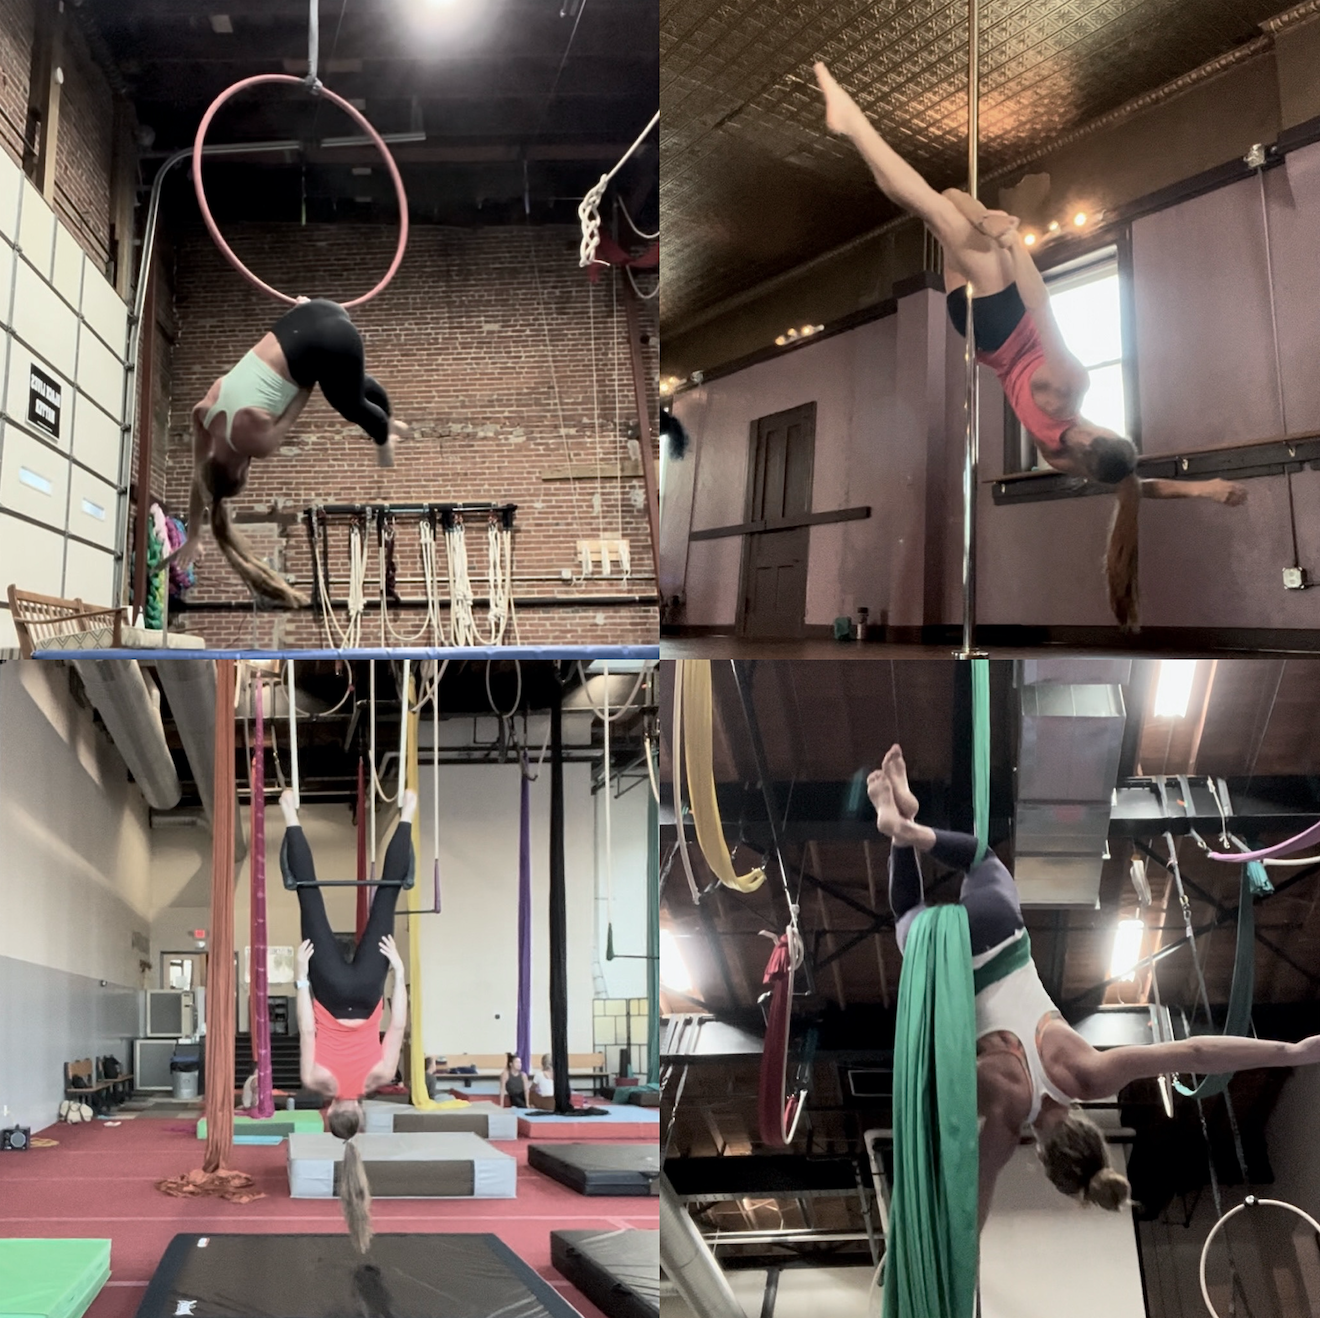 Aerial is addicting, your should try it!